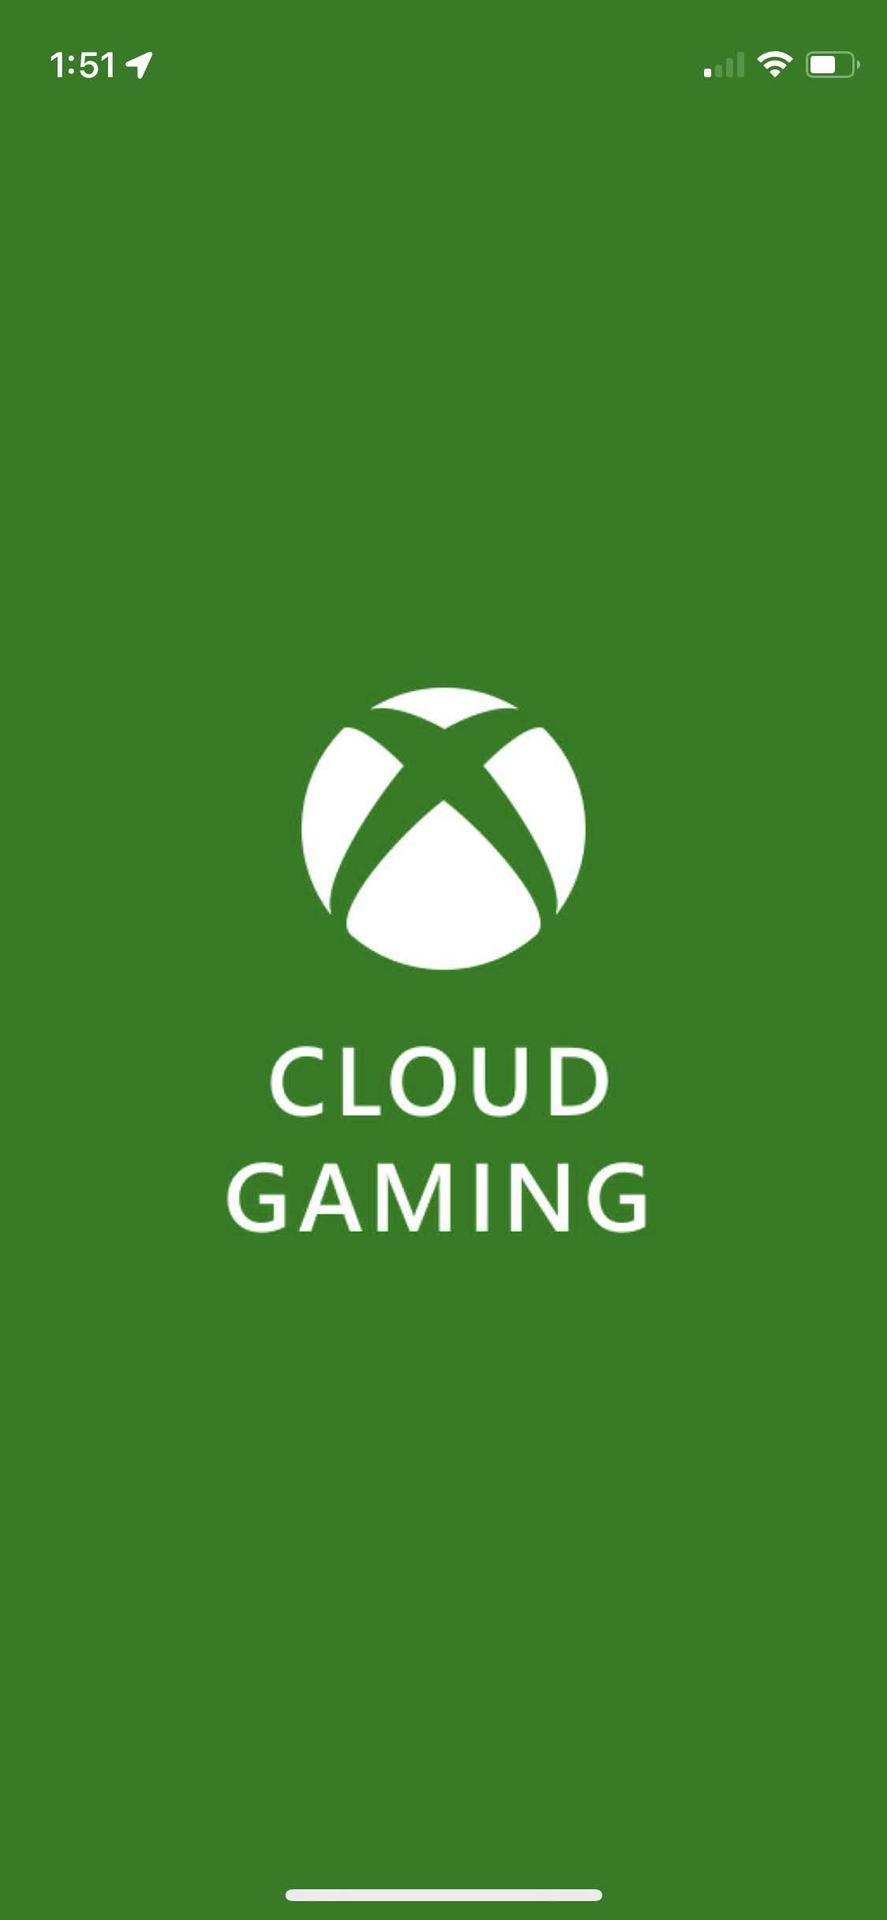 Play Xbox Cloud Gaming on iOS 6